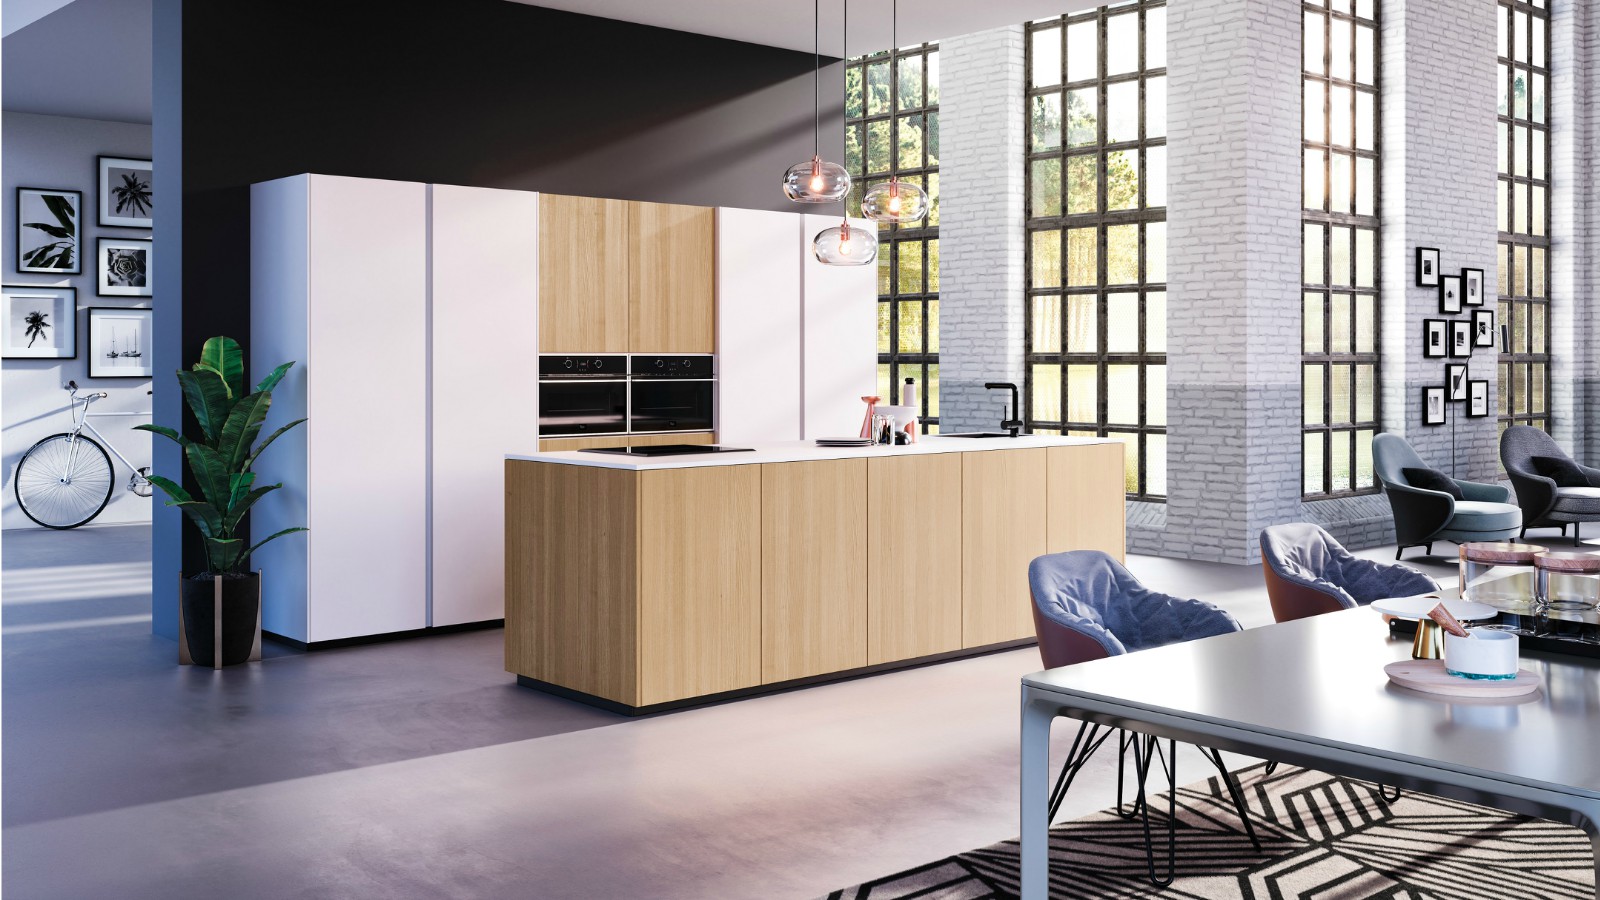 Rotpunkt launches kitchens with zero carbon footprint - KBN